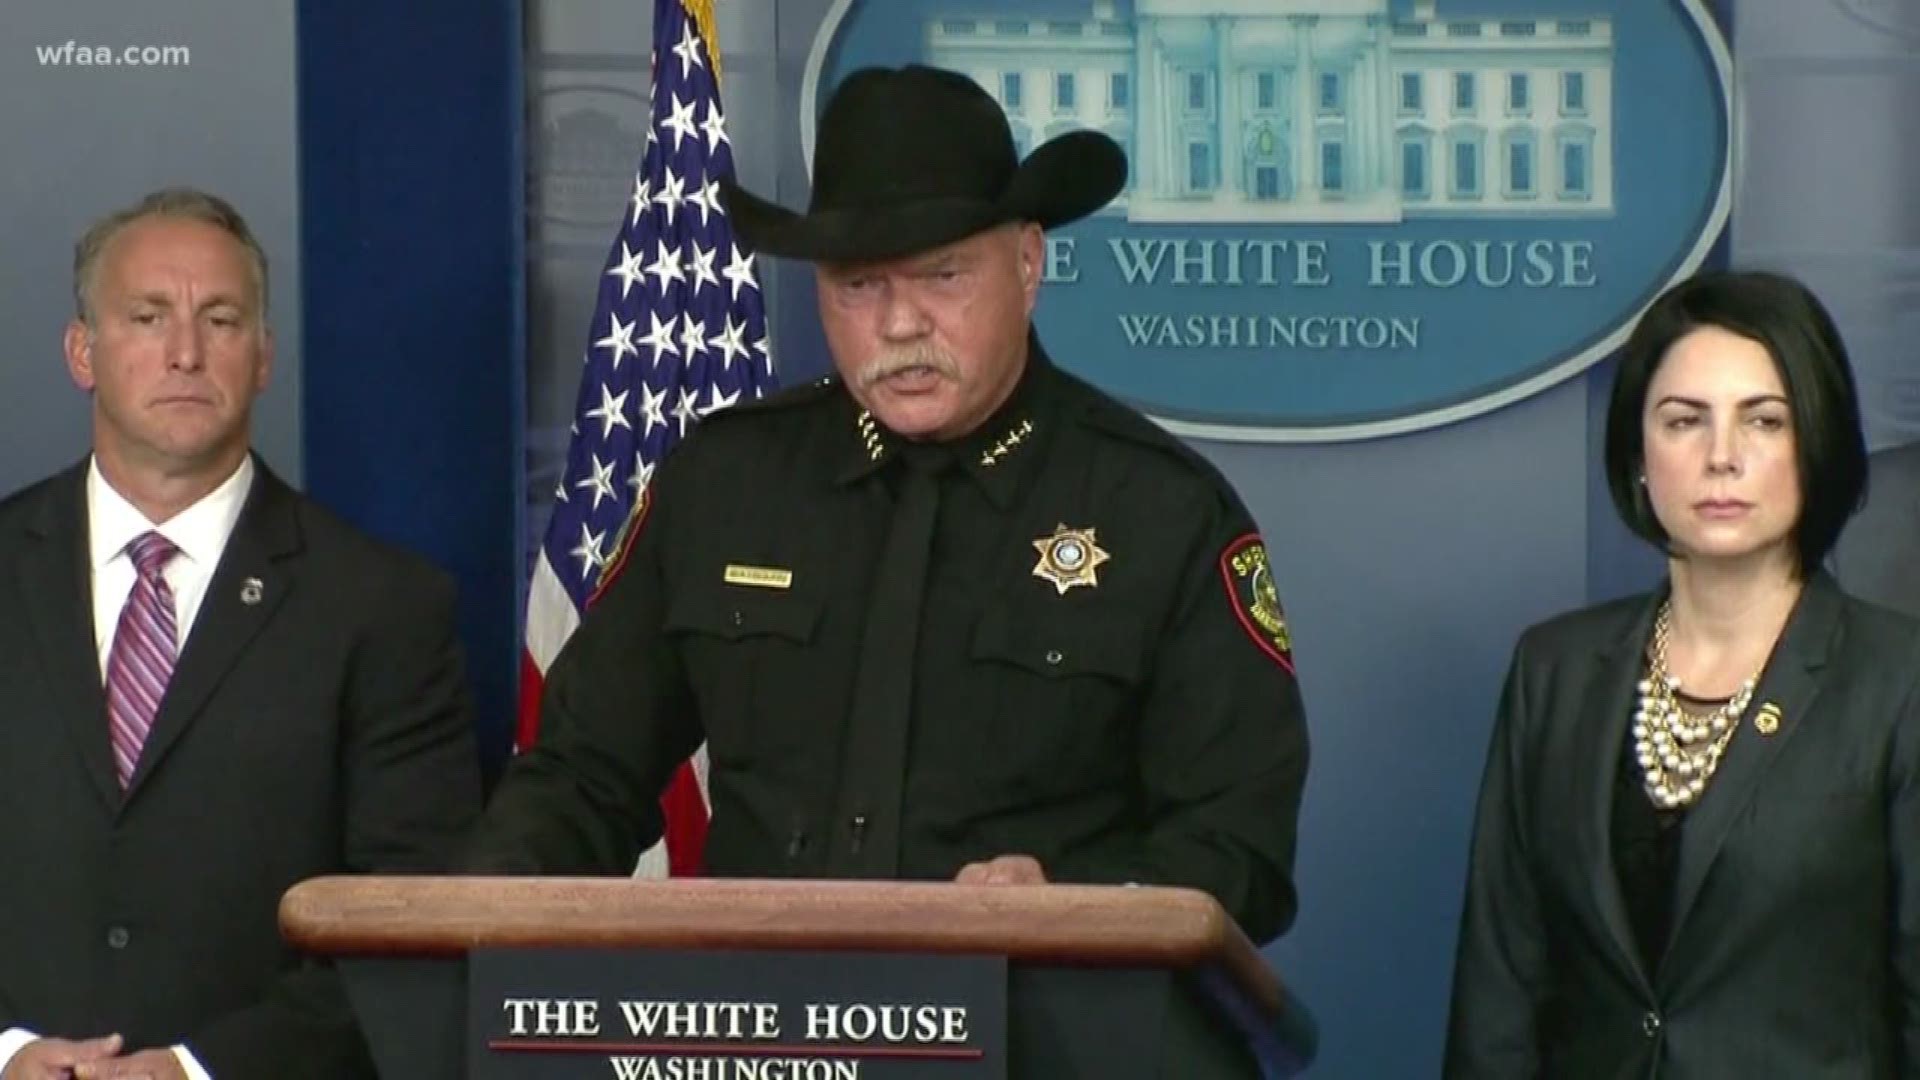 Sheriff Bill E. Waybourn made the comments while speaking at the White House during an ICE press conference on Thursday.